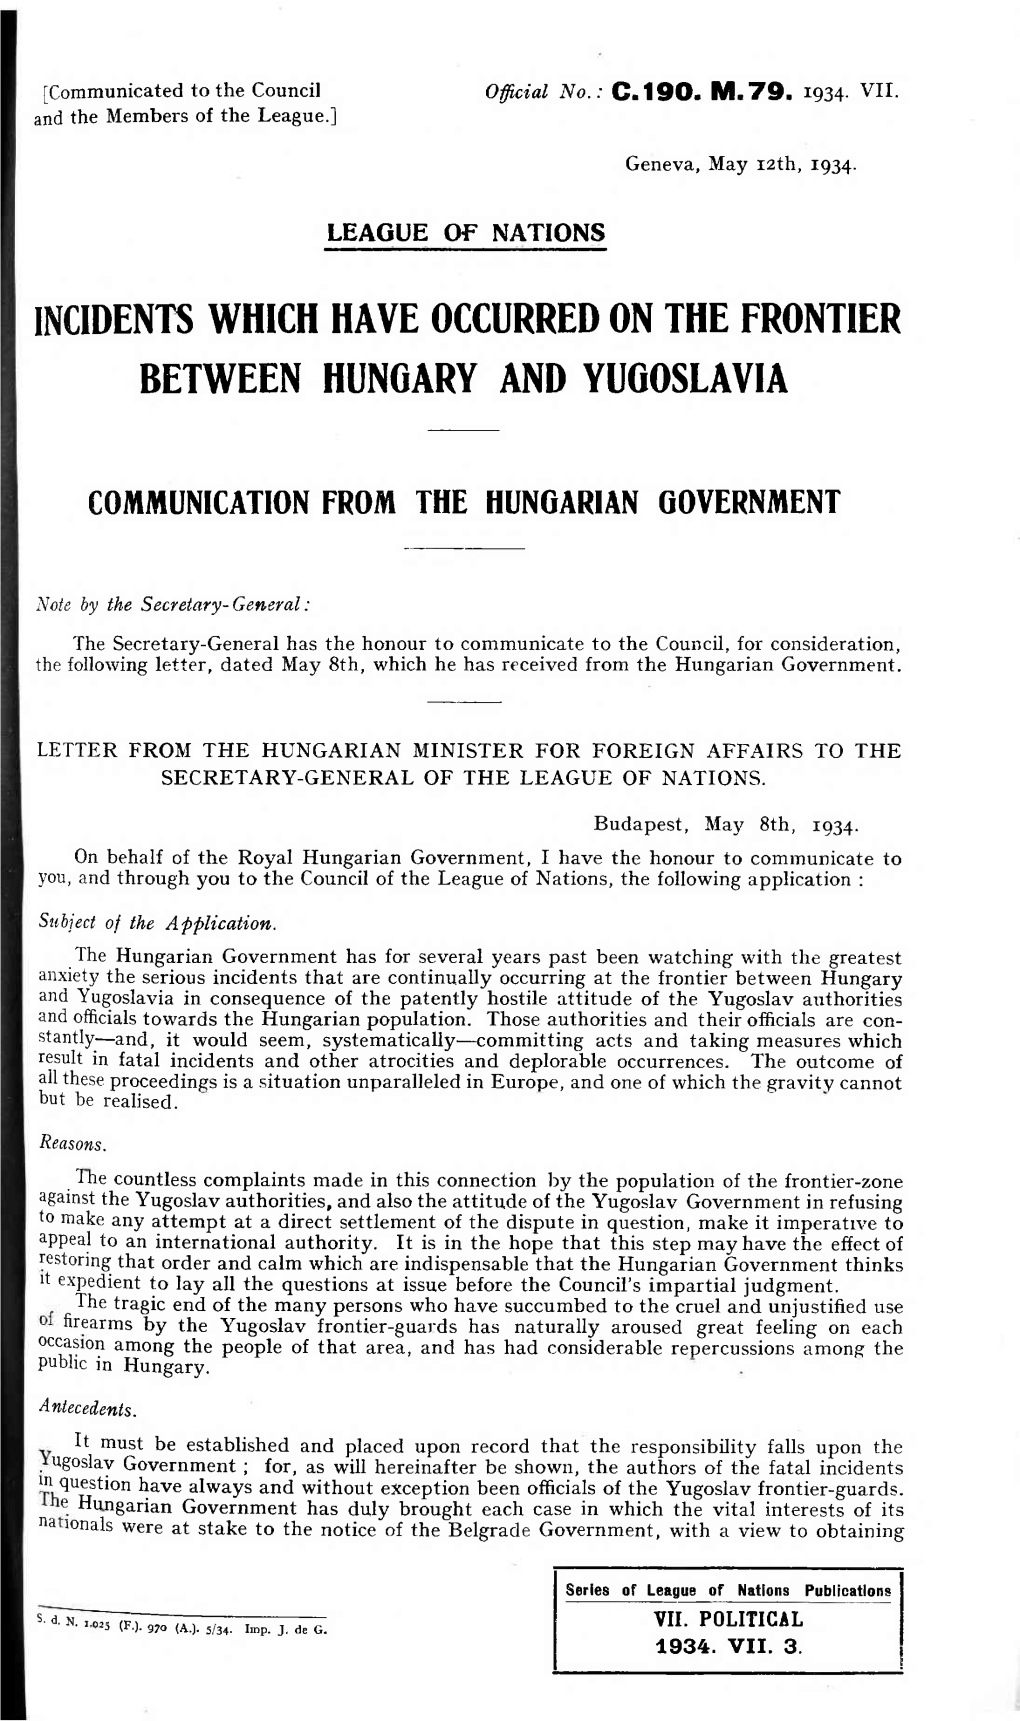 Incidents Which Have Occurred on the Frontier Between Hungary and Yugoslavia